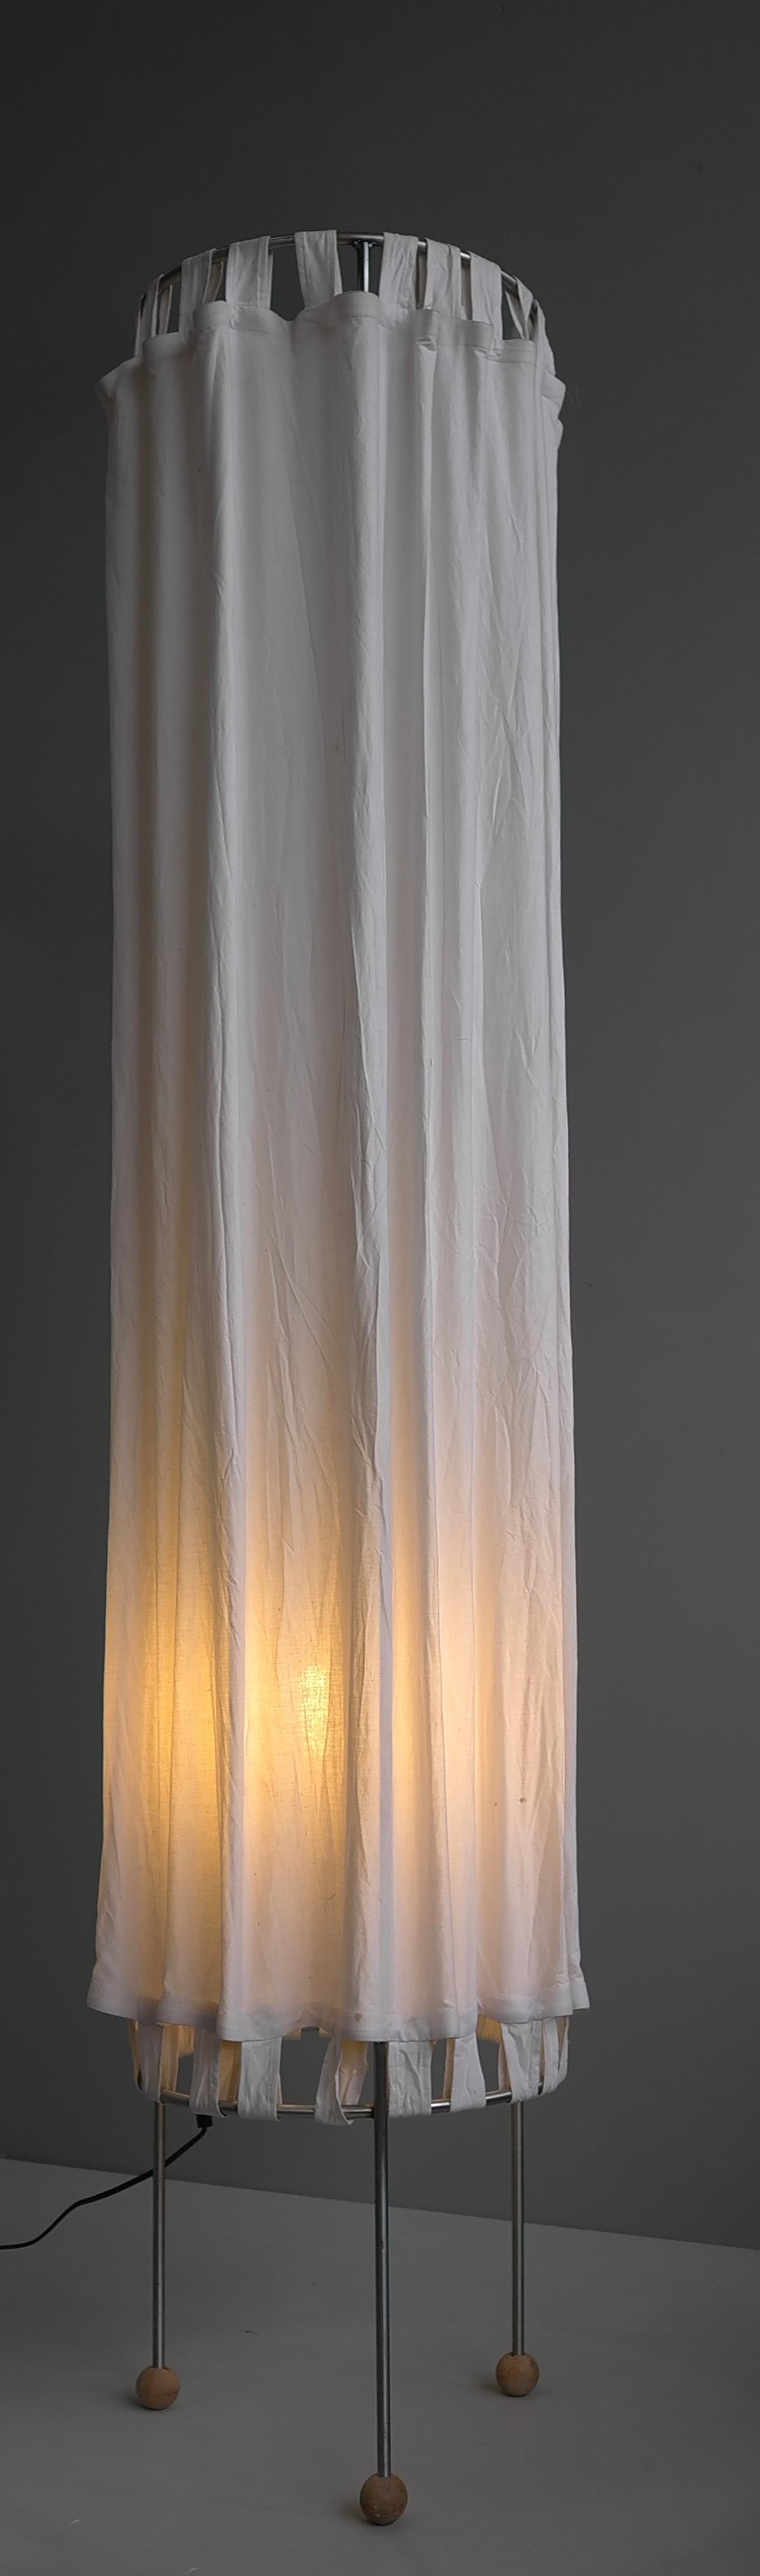 Extra Large White Linen Curtain Floorlamp, The Netherlands 1980's In Good Condition For Sale In Den Haag, NL